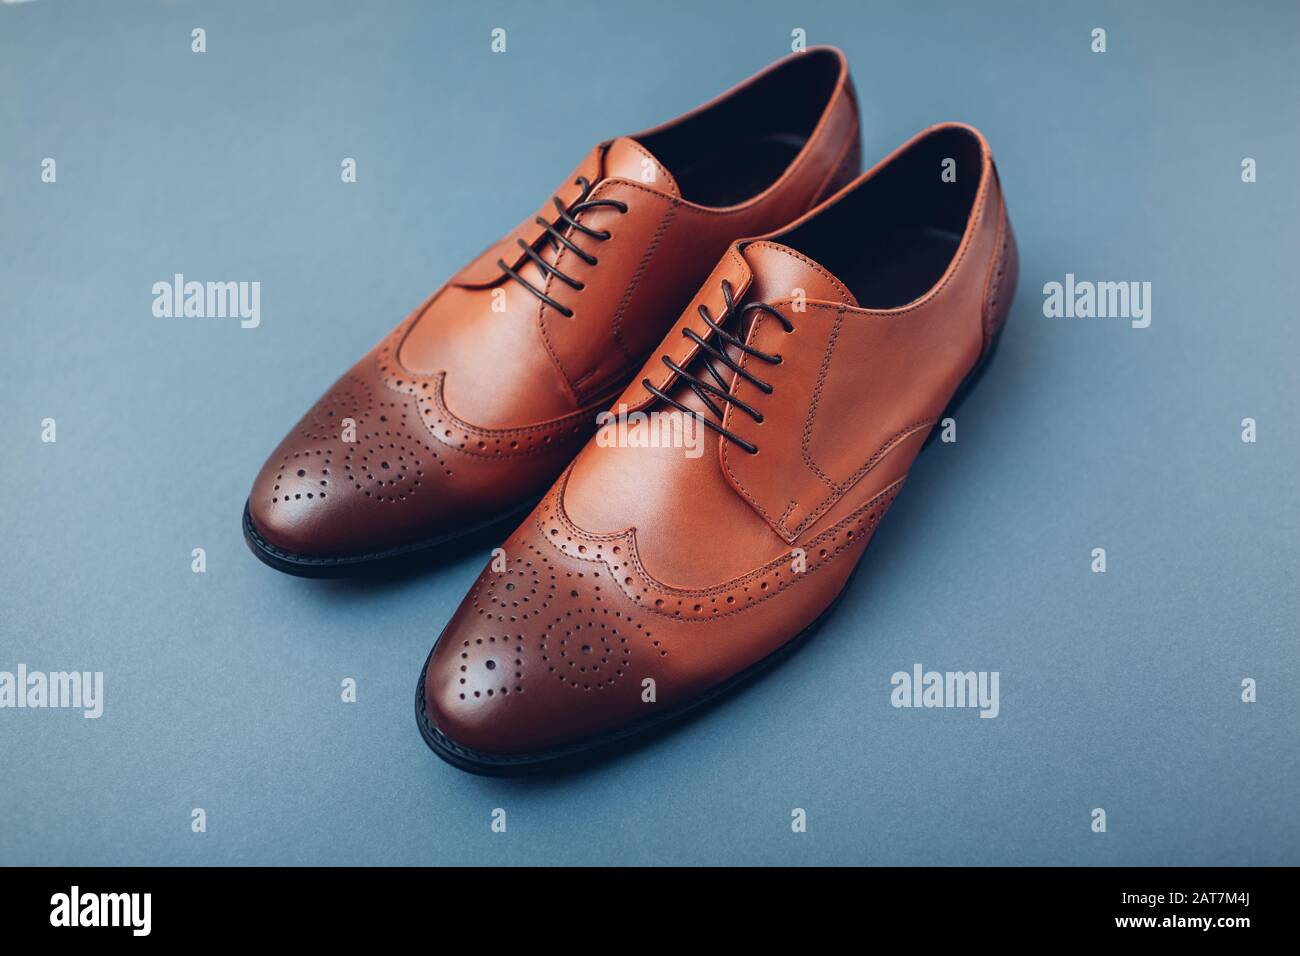 Oxford male brogues shoes. Men's fashion. Classical brown leather footwear  Stock Photo - Alamy